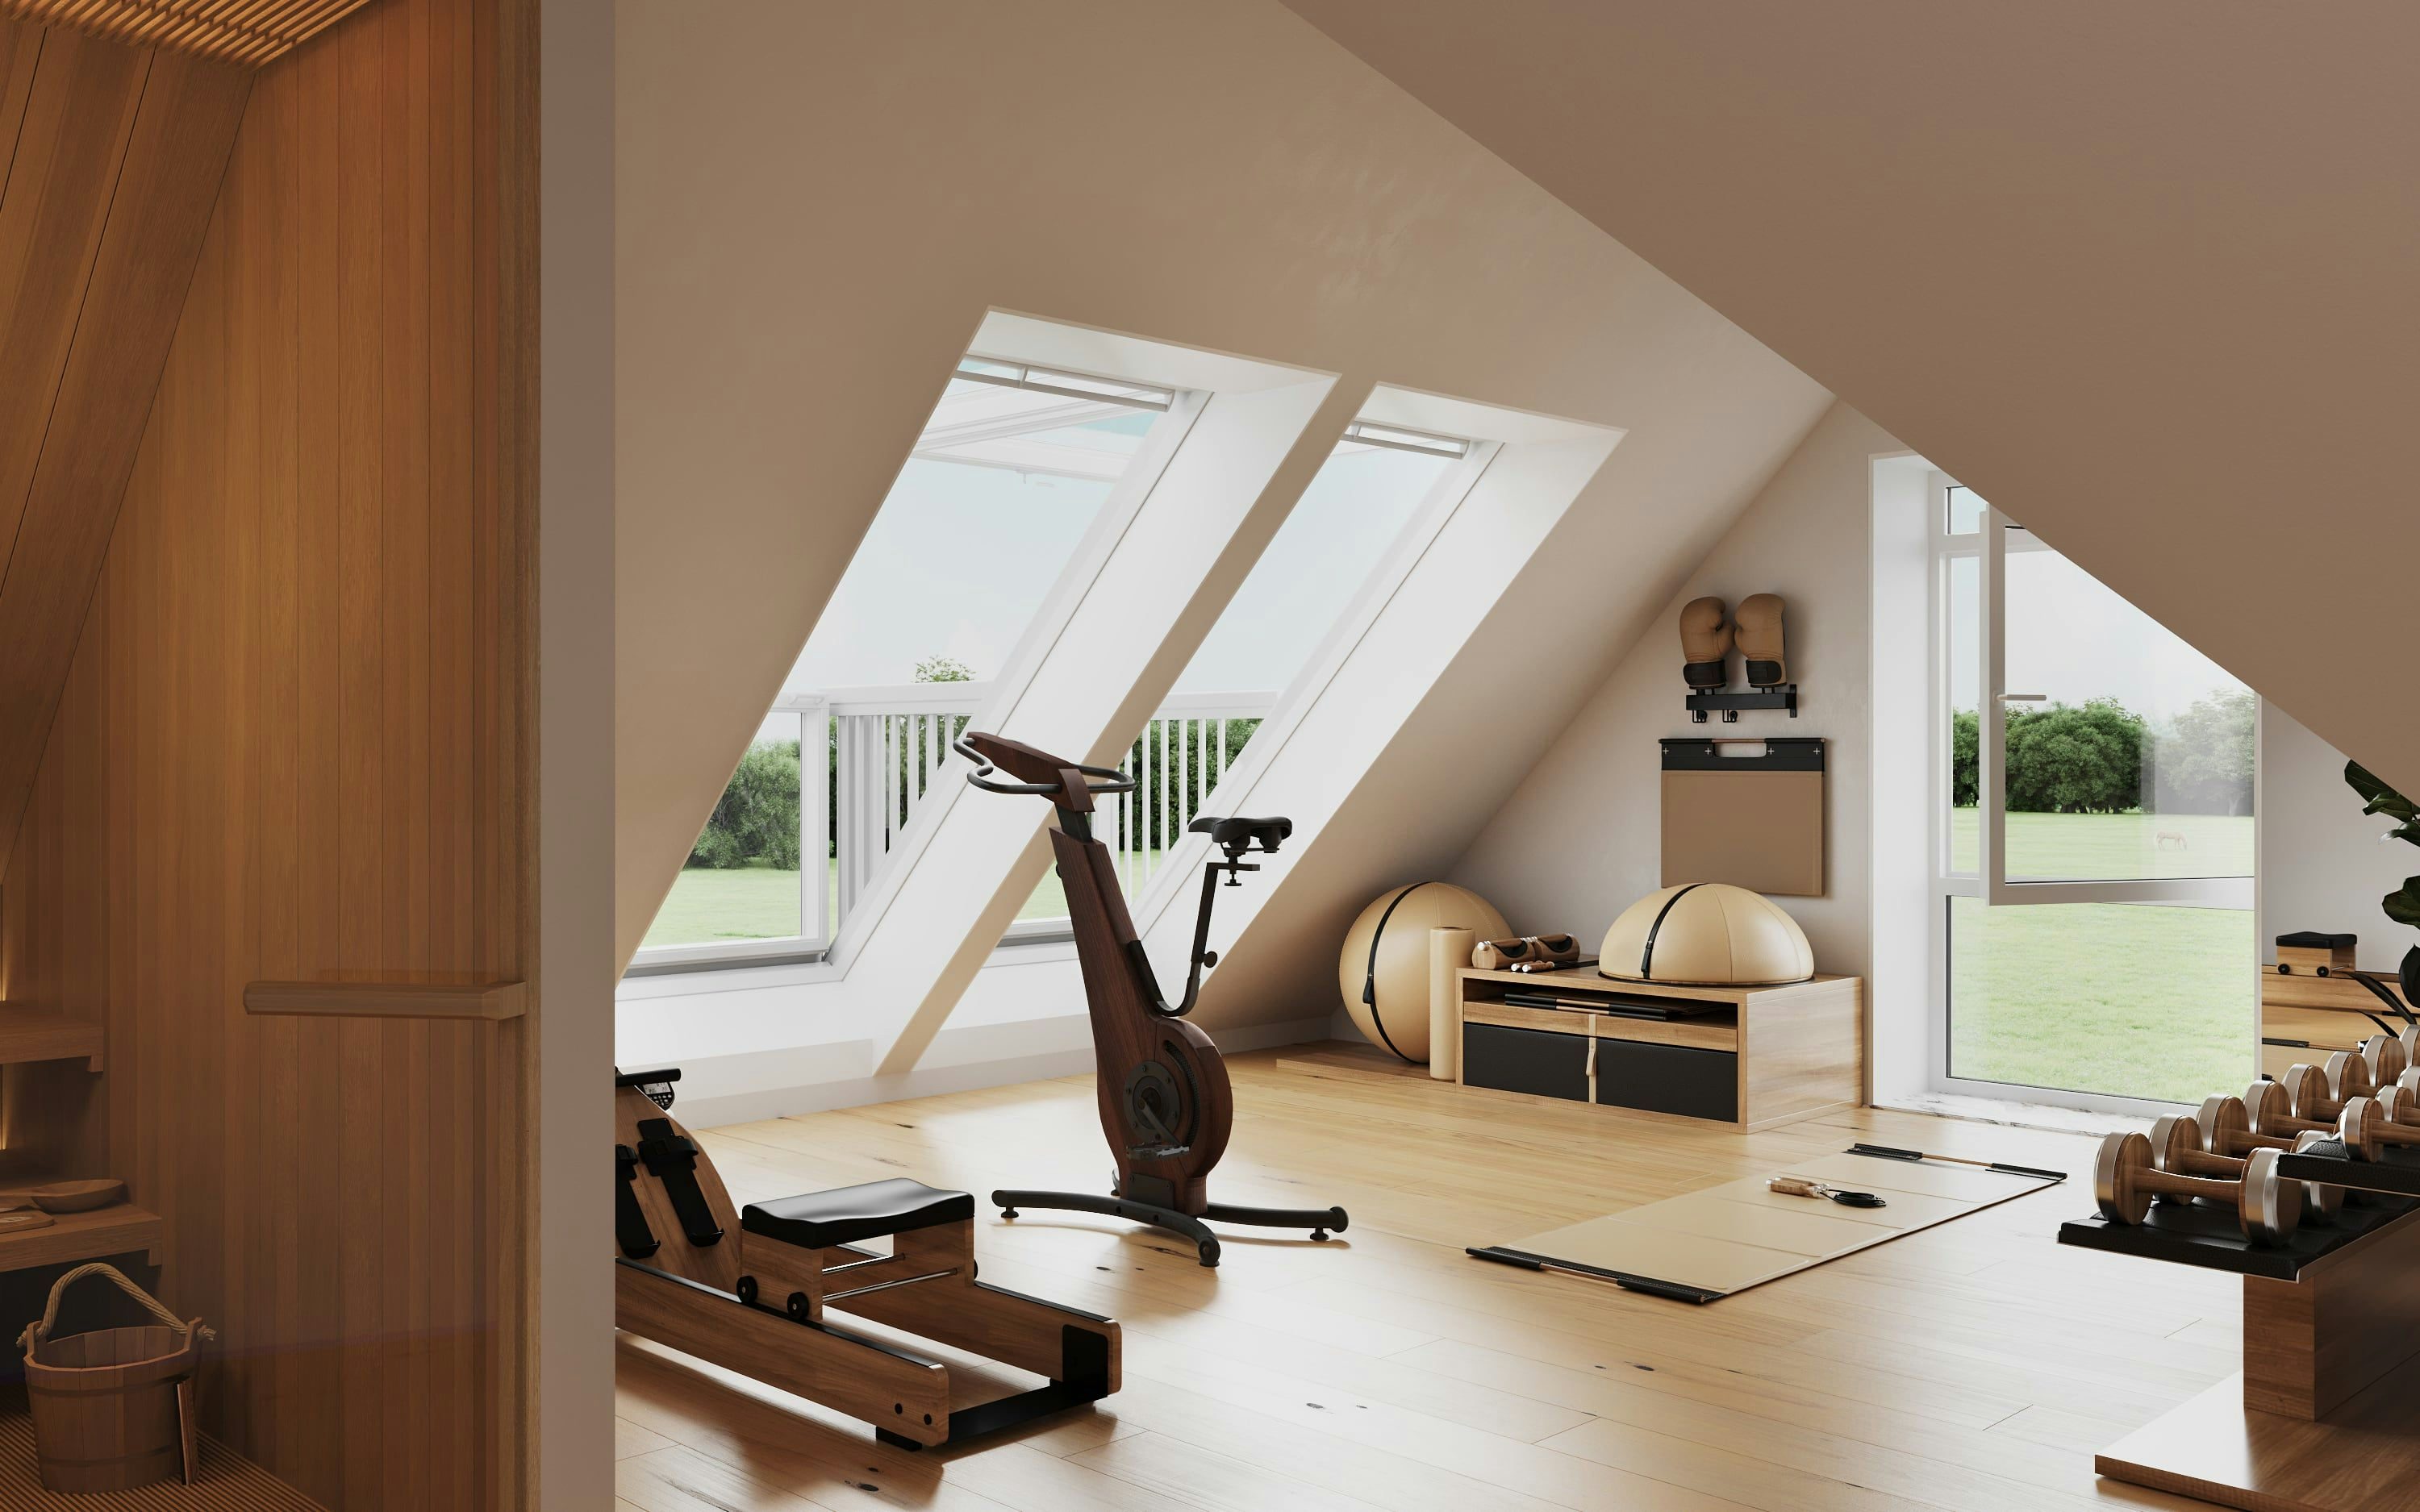 3D Interior Visualization of private gym / activity room in house Hamburg Germany